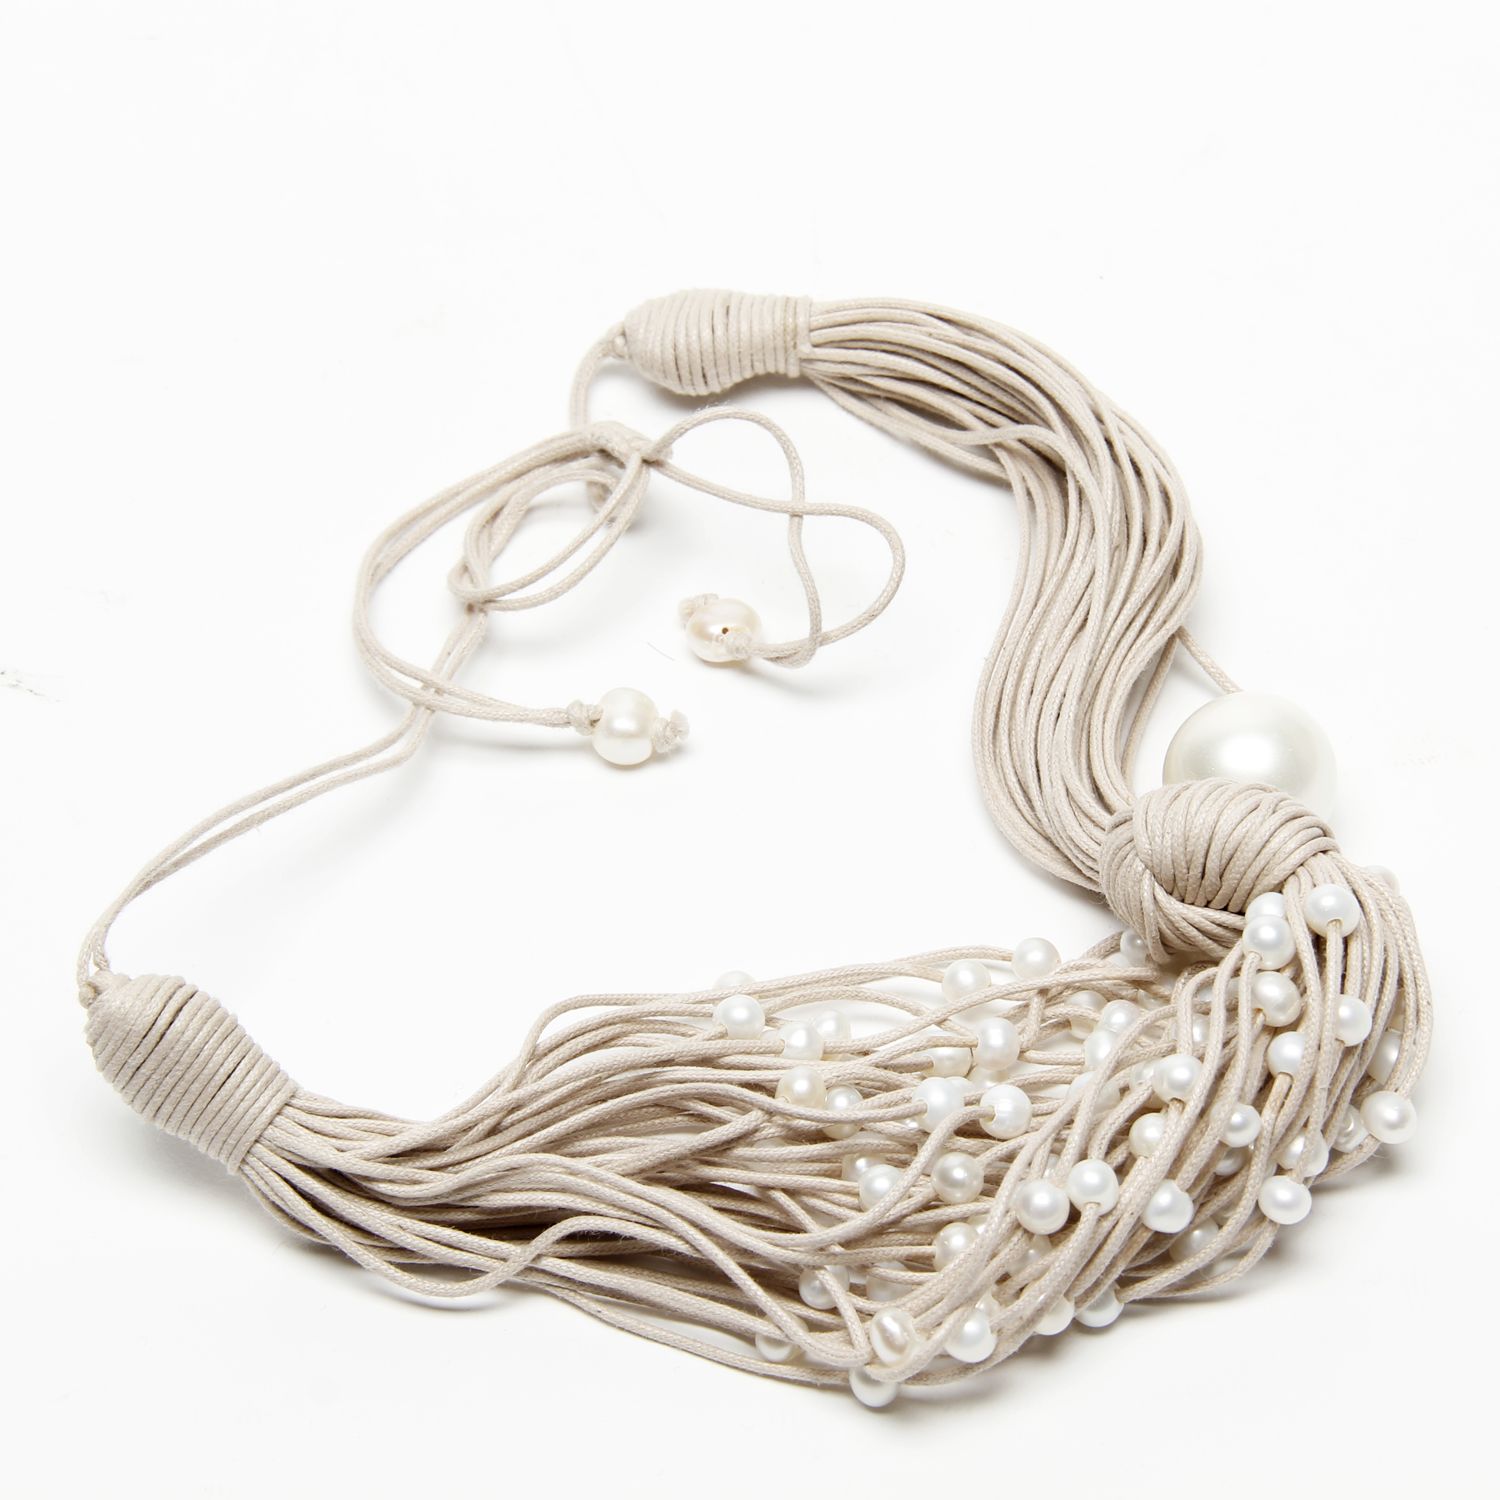 Oz & Ella Design: Pearl Scarf Necklace – Neutral Product Image 2 of 3